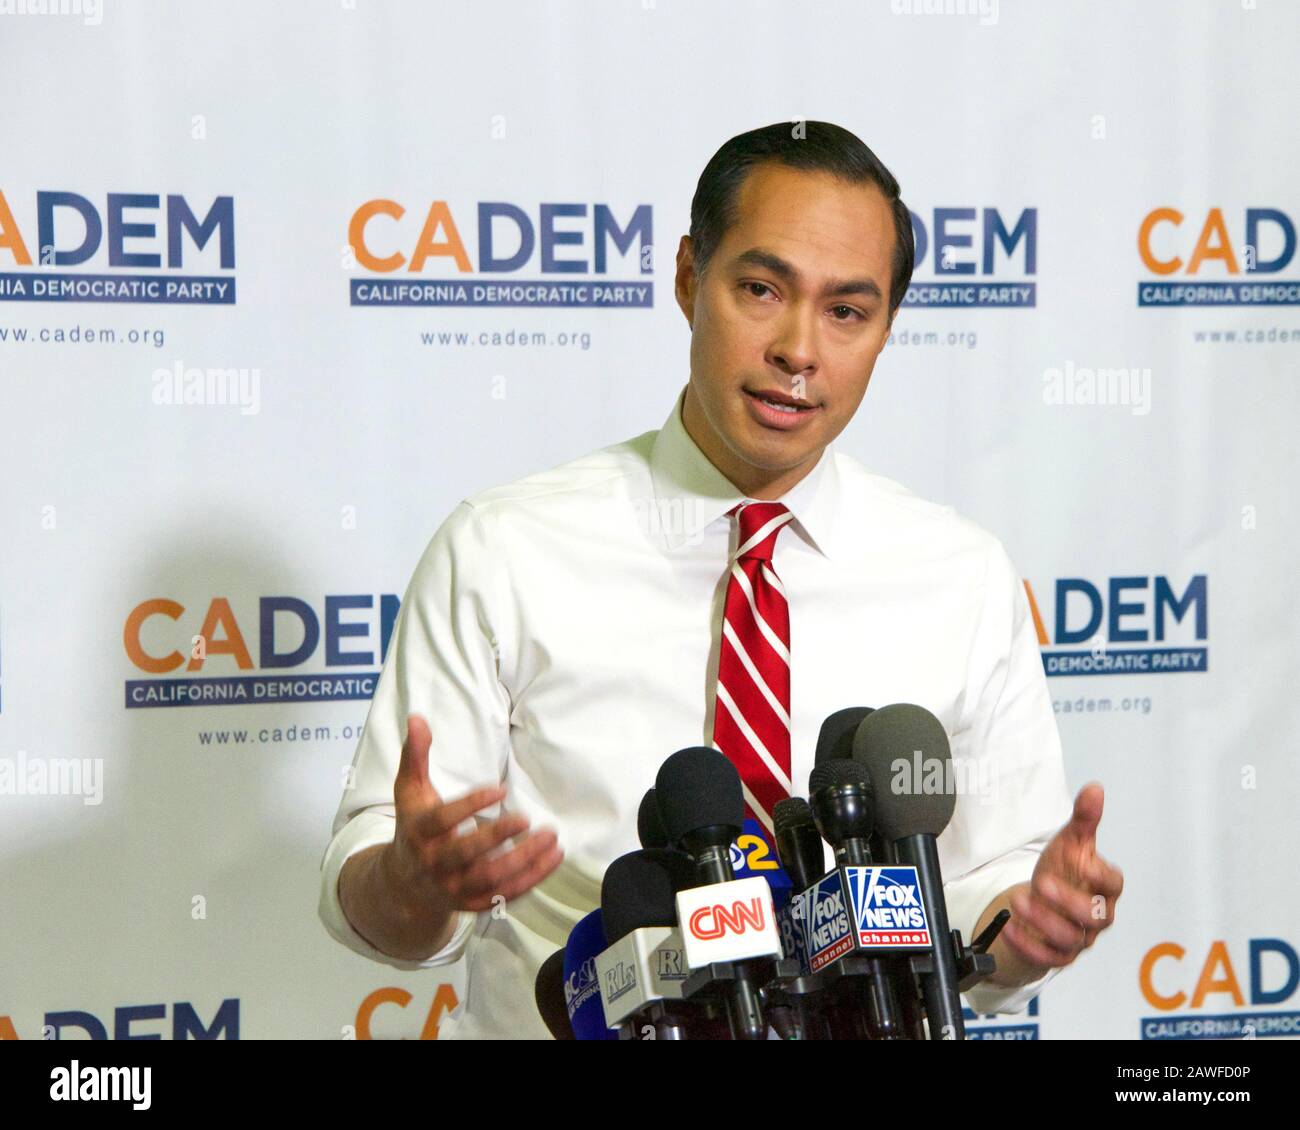 Long Beach, CA - Nov 16, 2019: Presidential candidate Julian Castro speaking at the Democratic Party Endorsing Convention in Long Beach, CA Stock Photo